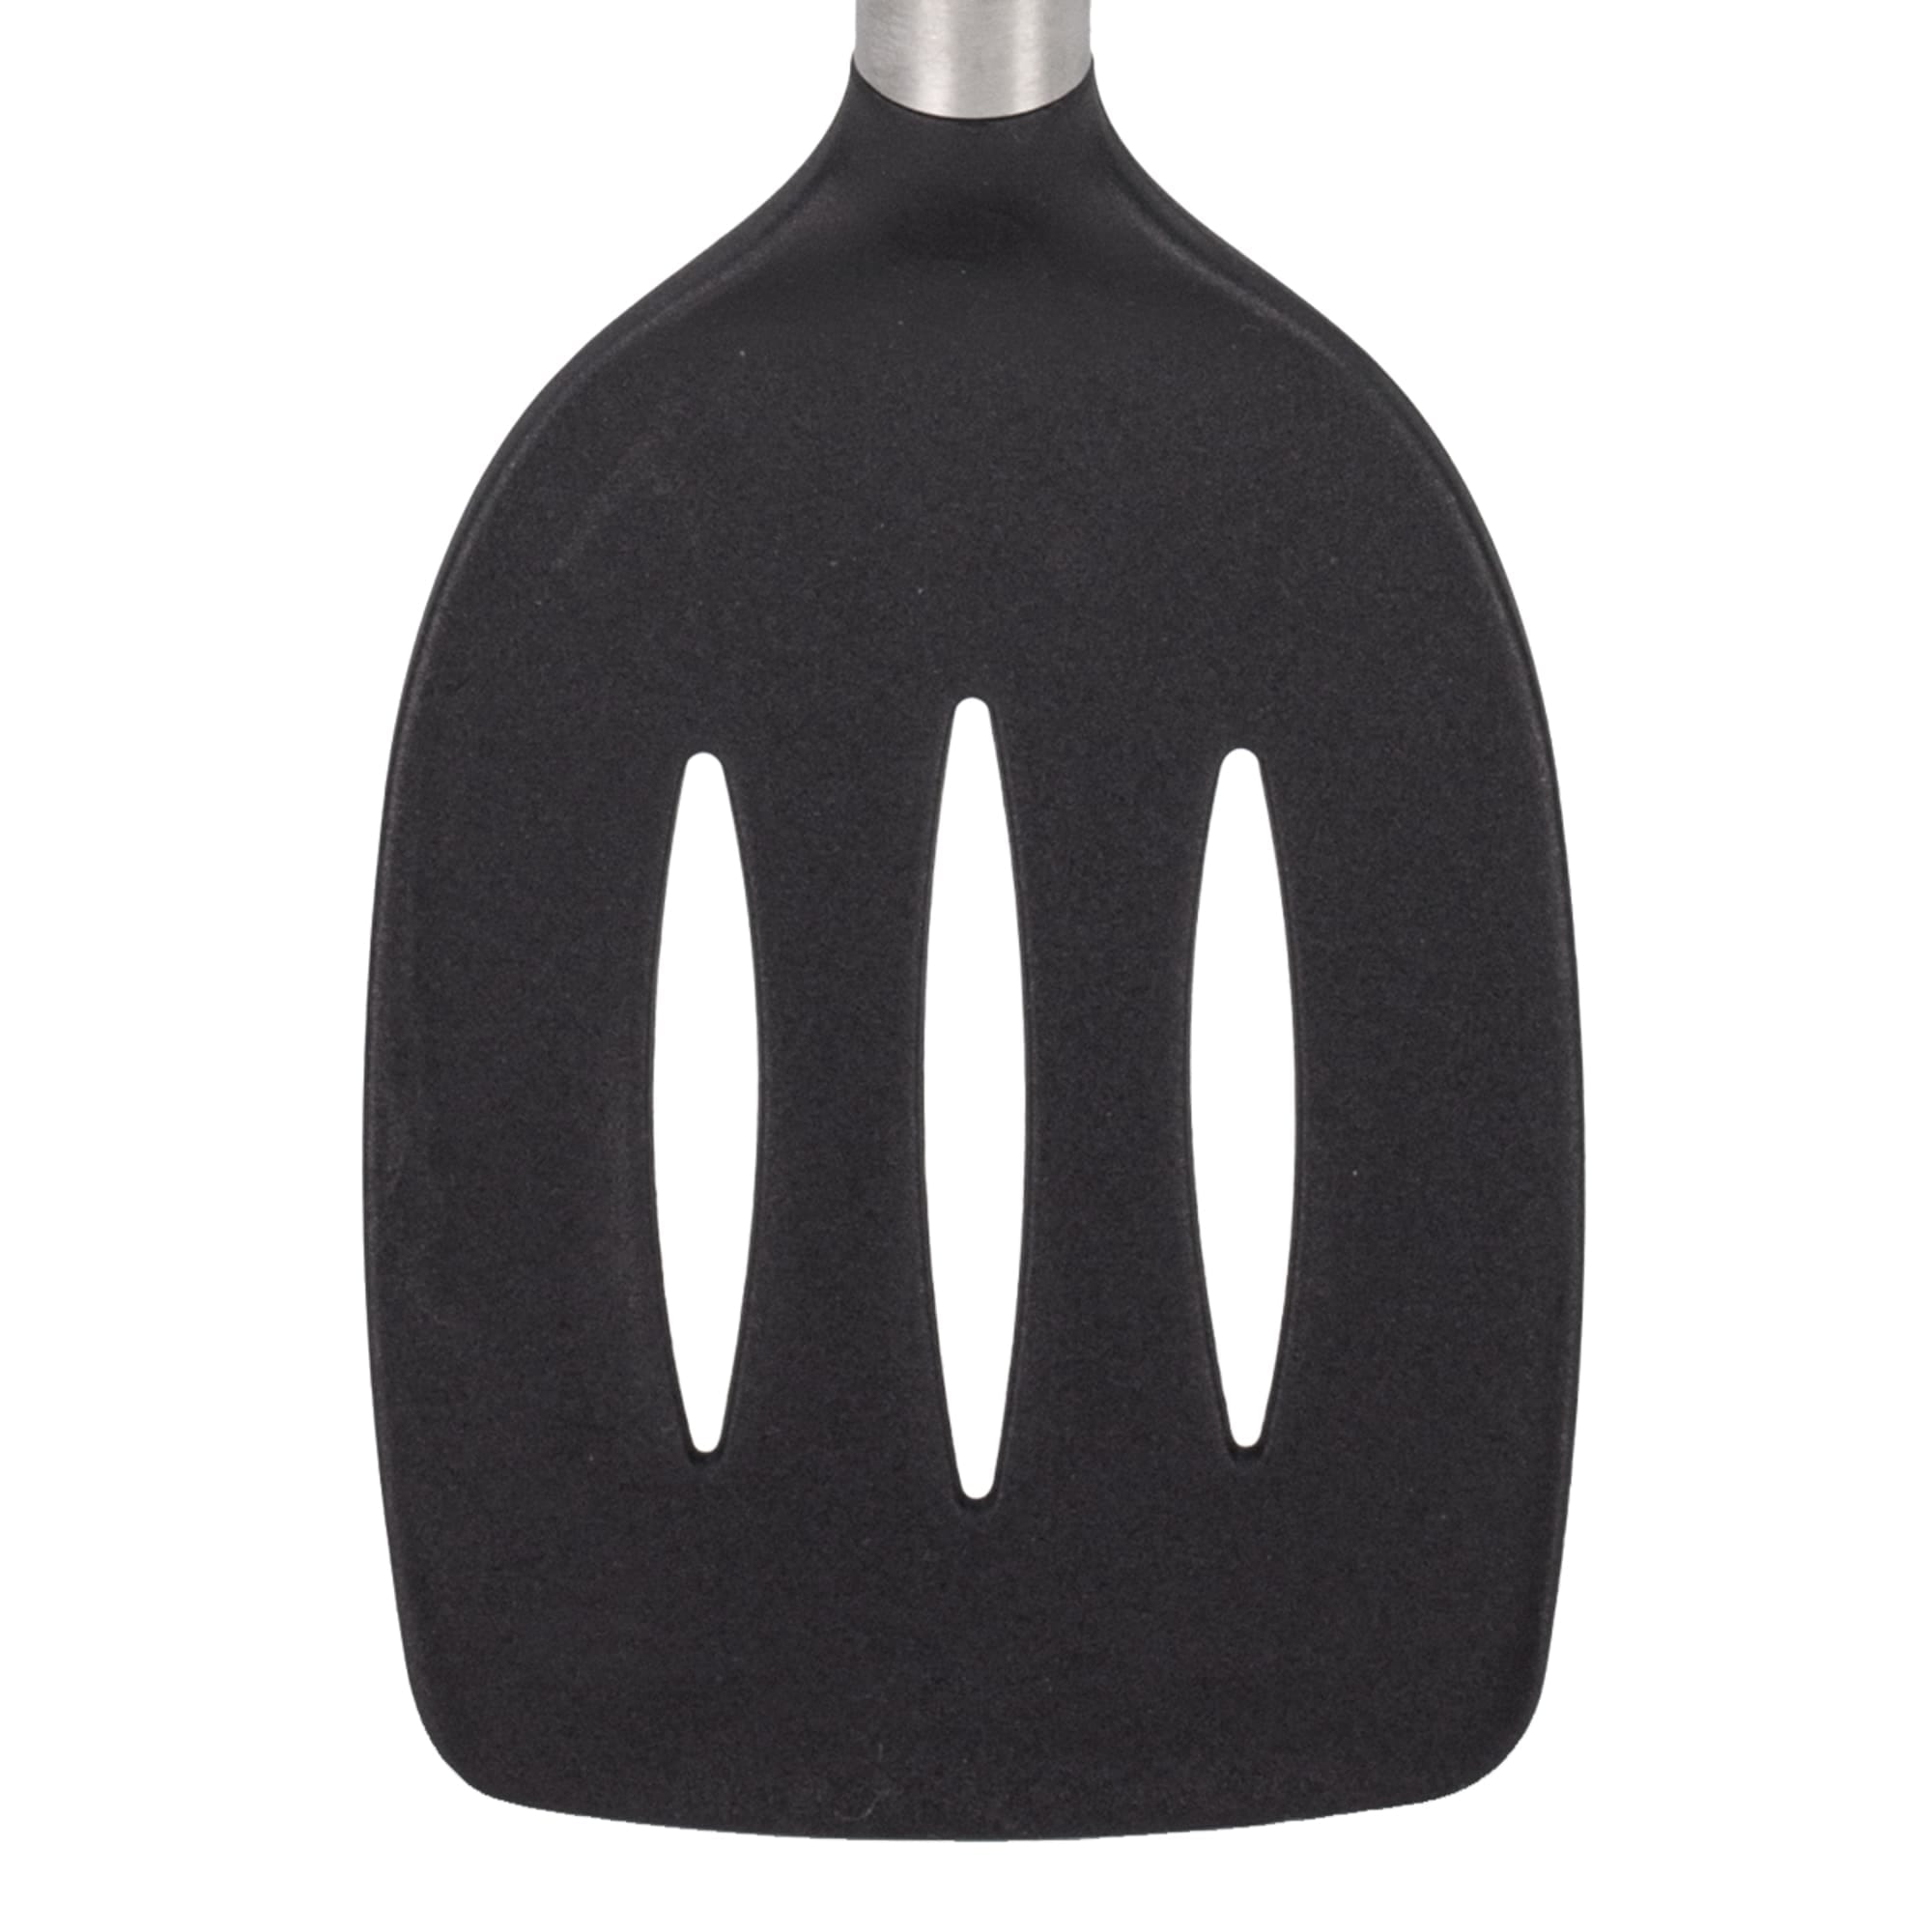 Home Basics Vista Slotted Spatula $2.00 EACH, CASE PACK OF 24